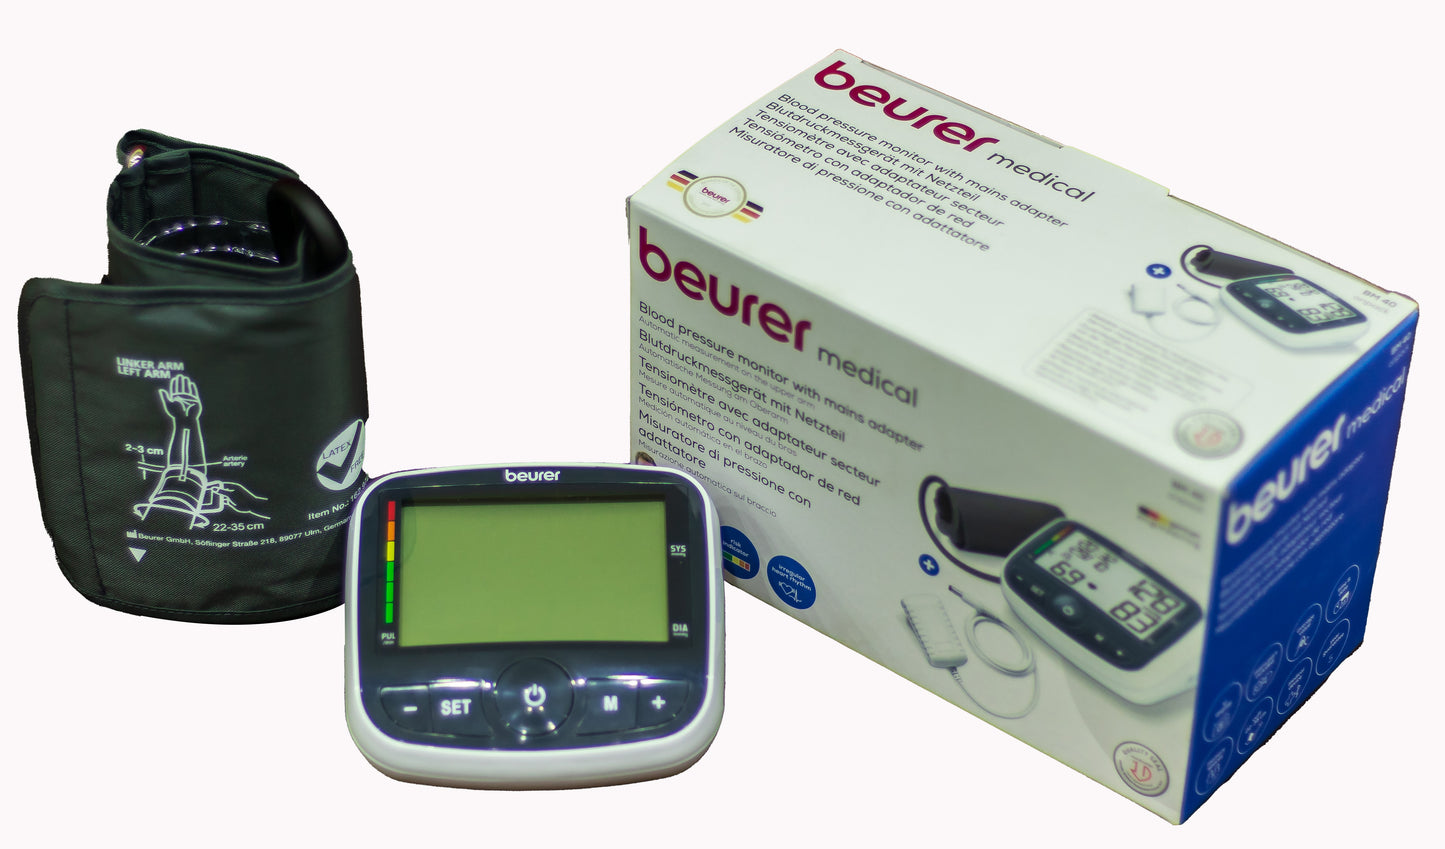 Beurer Bm 40 Upper Arm Blood Pressure Monitor with adaptor (On-Pack)